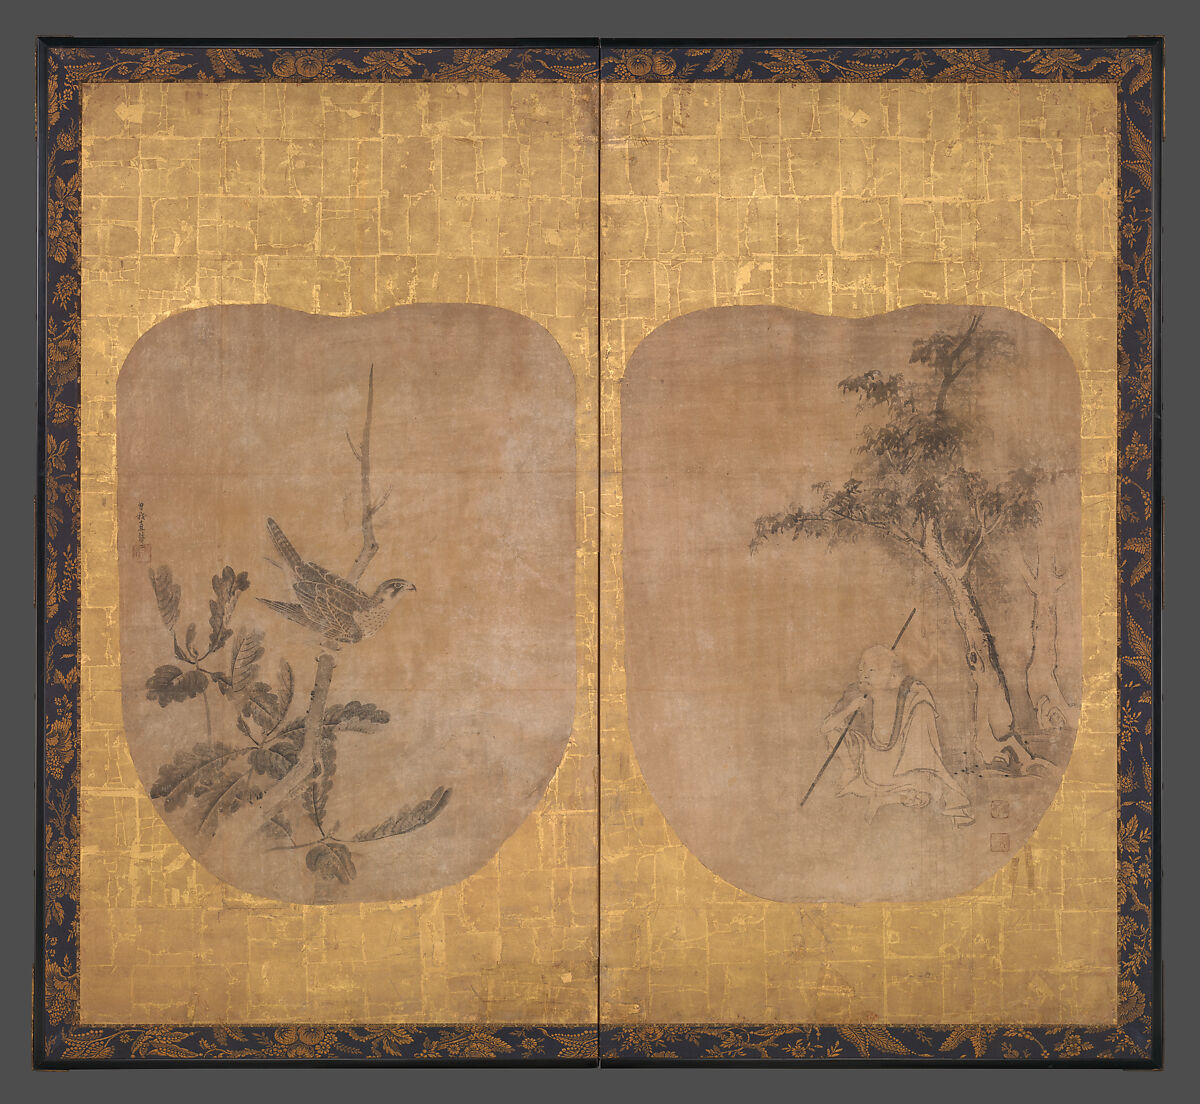 Daoist Sage and Hawk, Soga Nichokuan, Pair of fan-shaped paintings mounted on two-panel folding screen; ink on paper, Japan